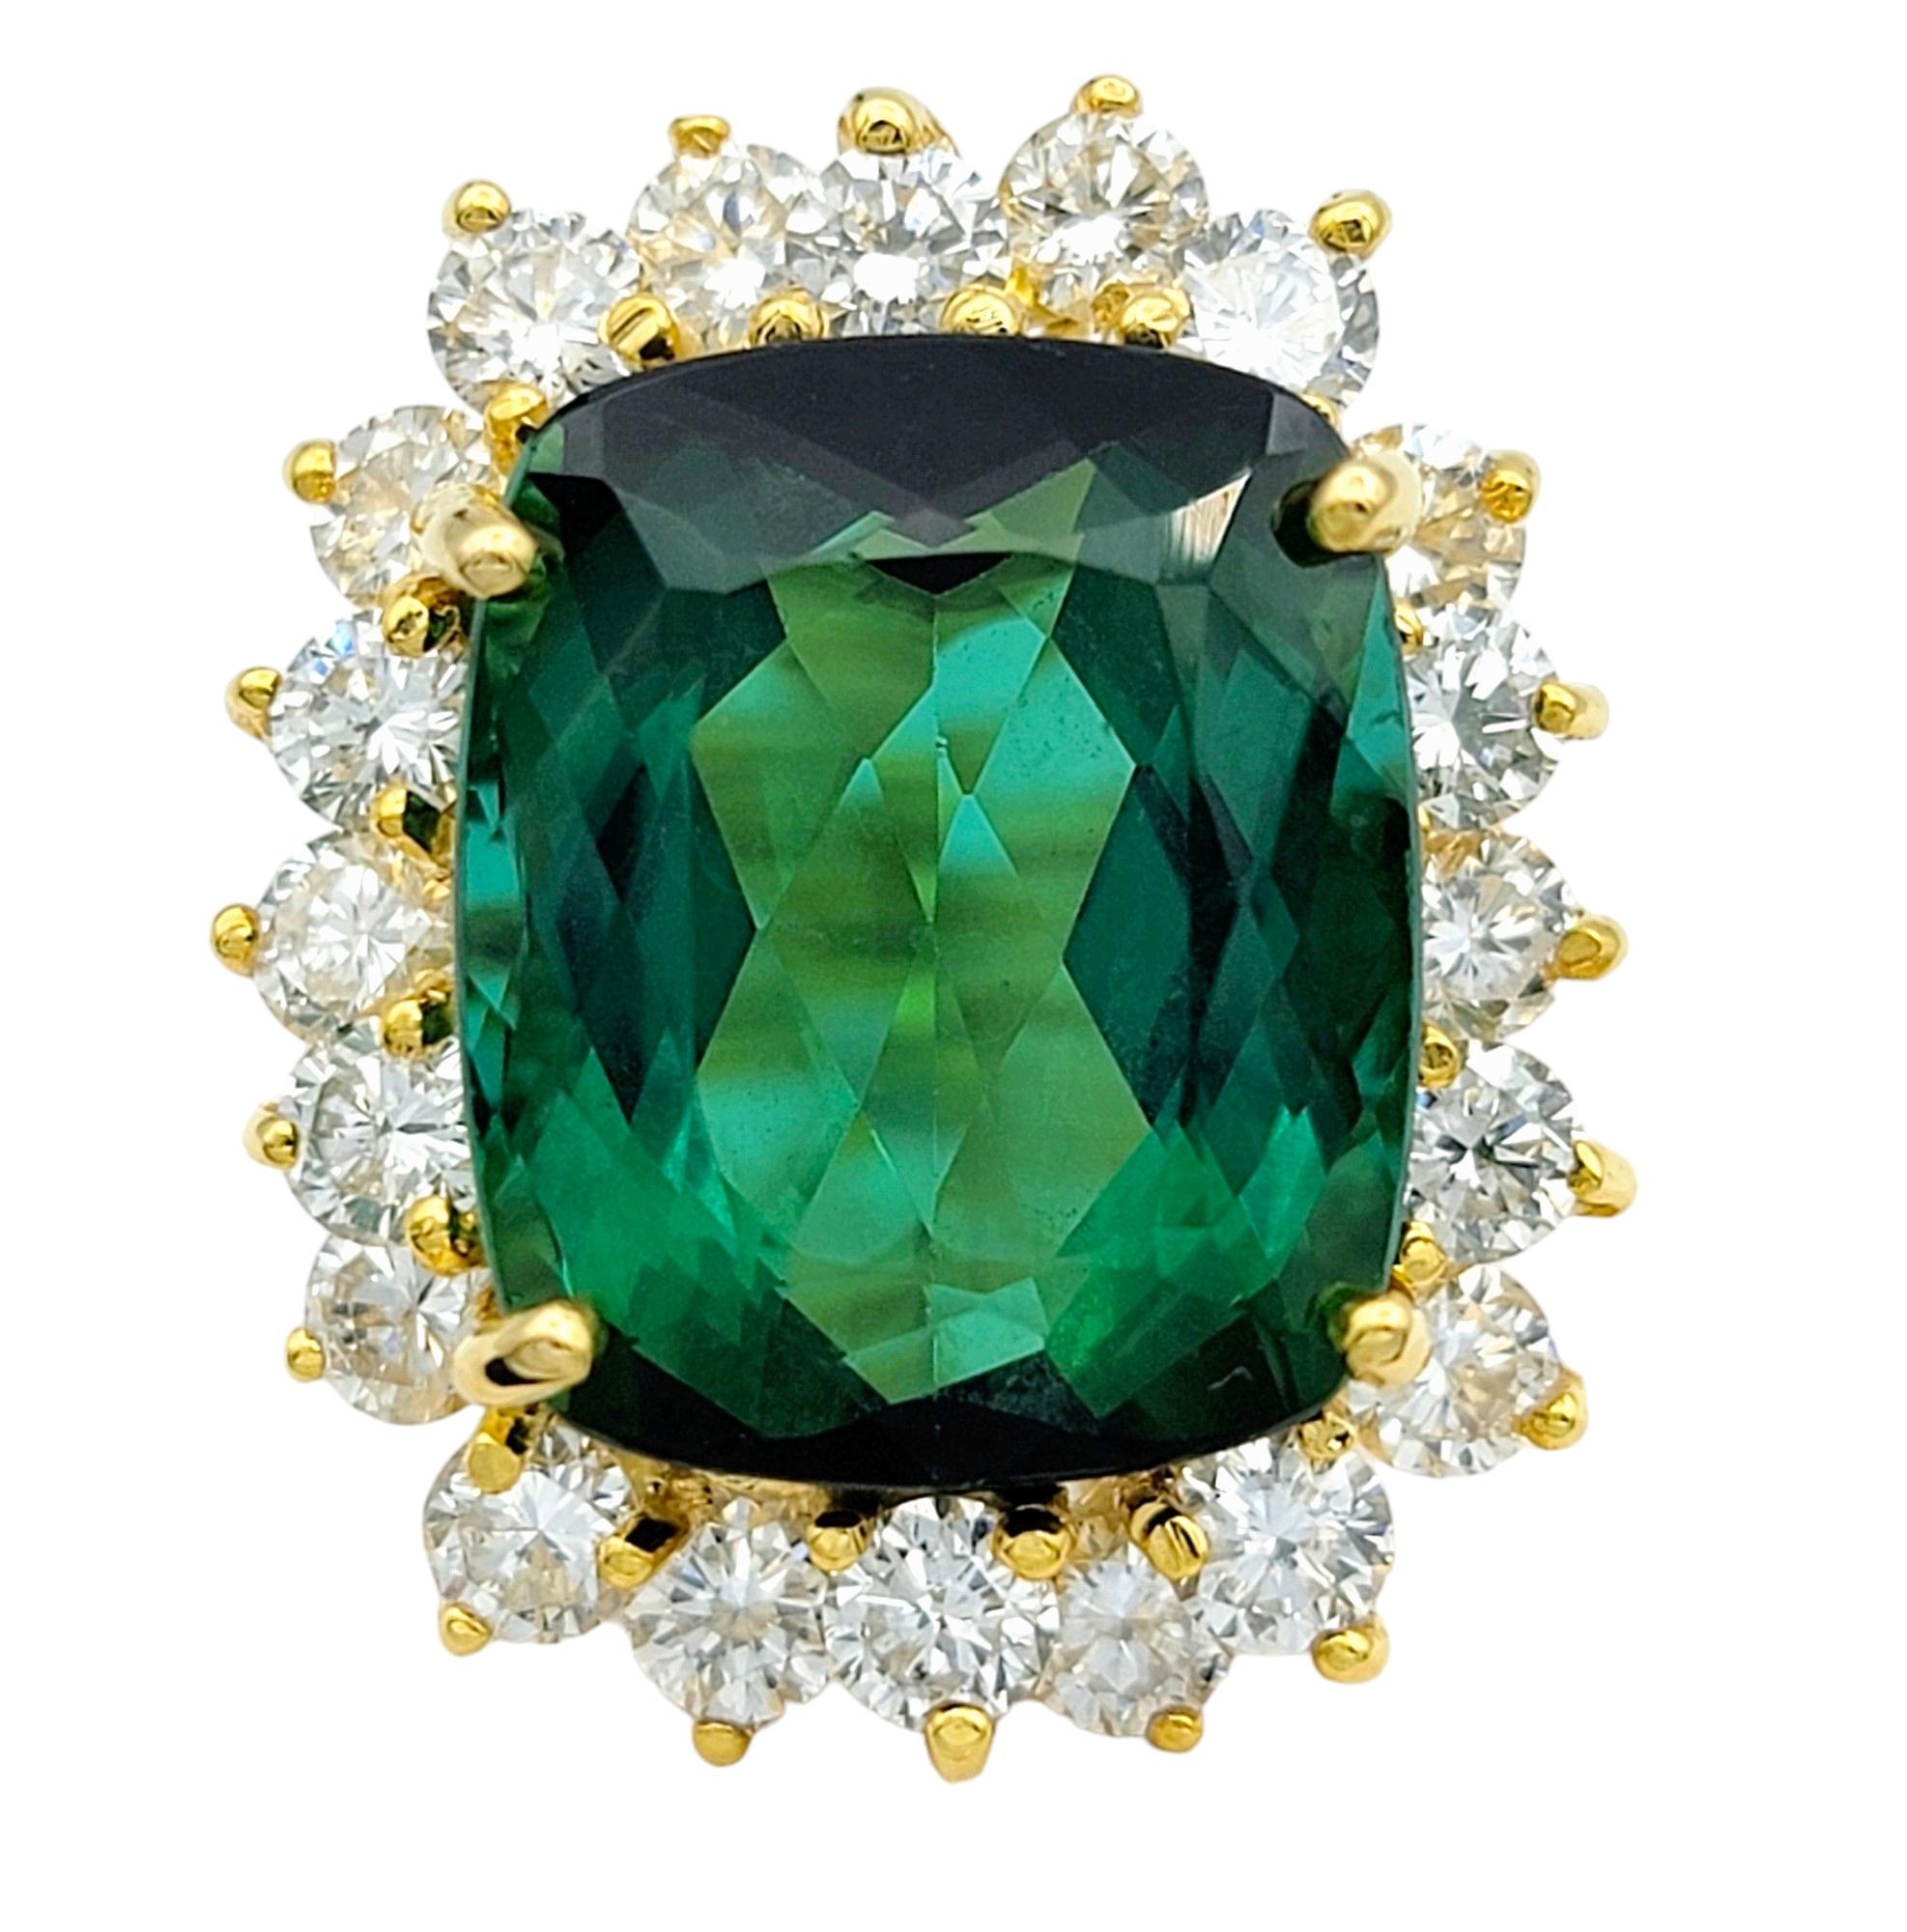 Contemporary Large Cushion Cut Green Tourmaline and Diamond Halo Ring in 14 Karat Yellow Gold For Sale